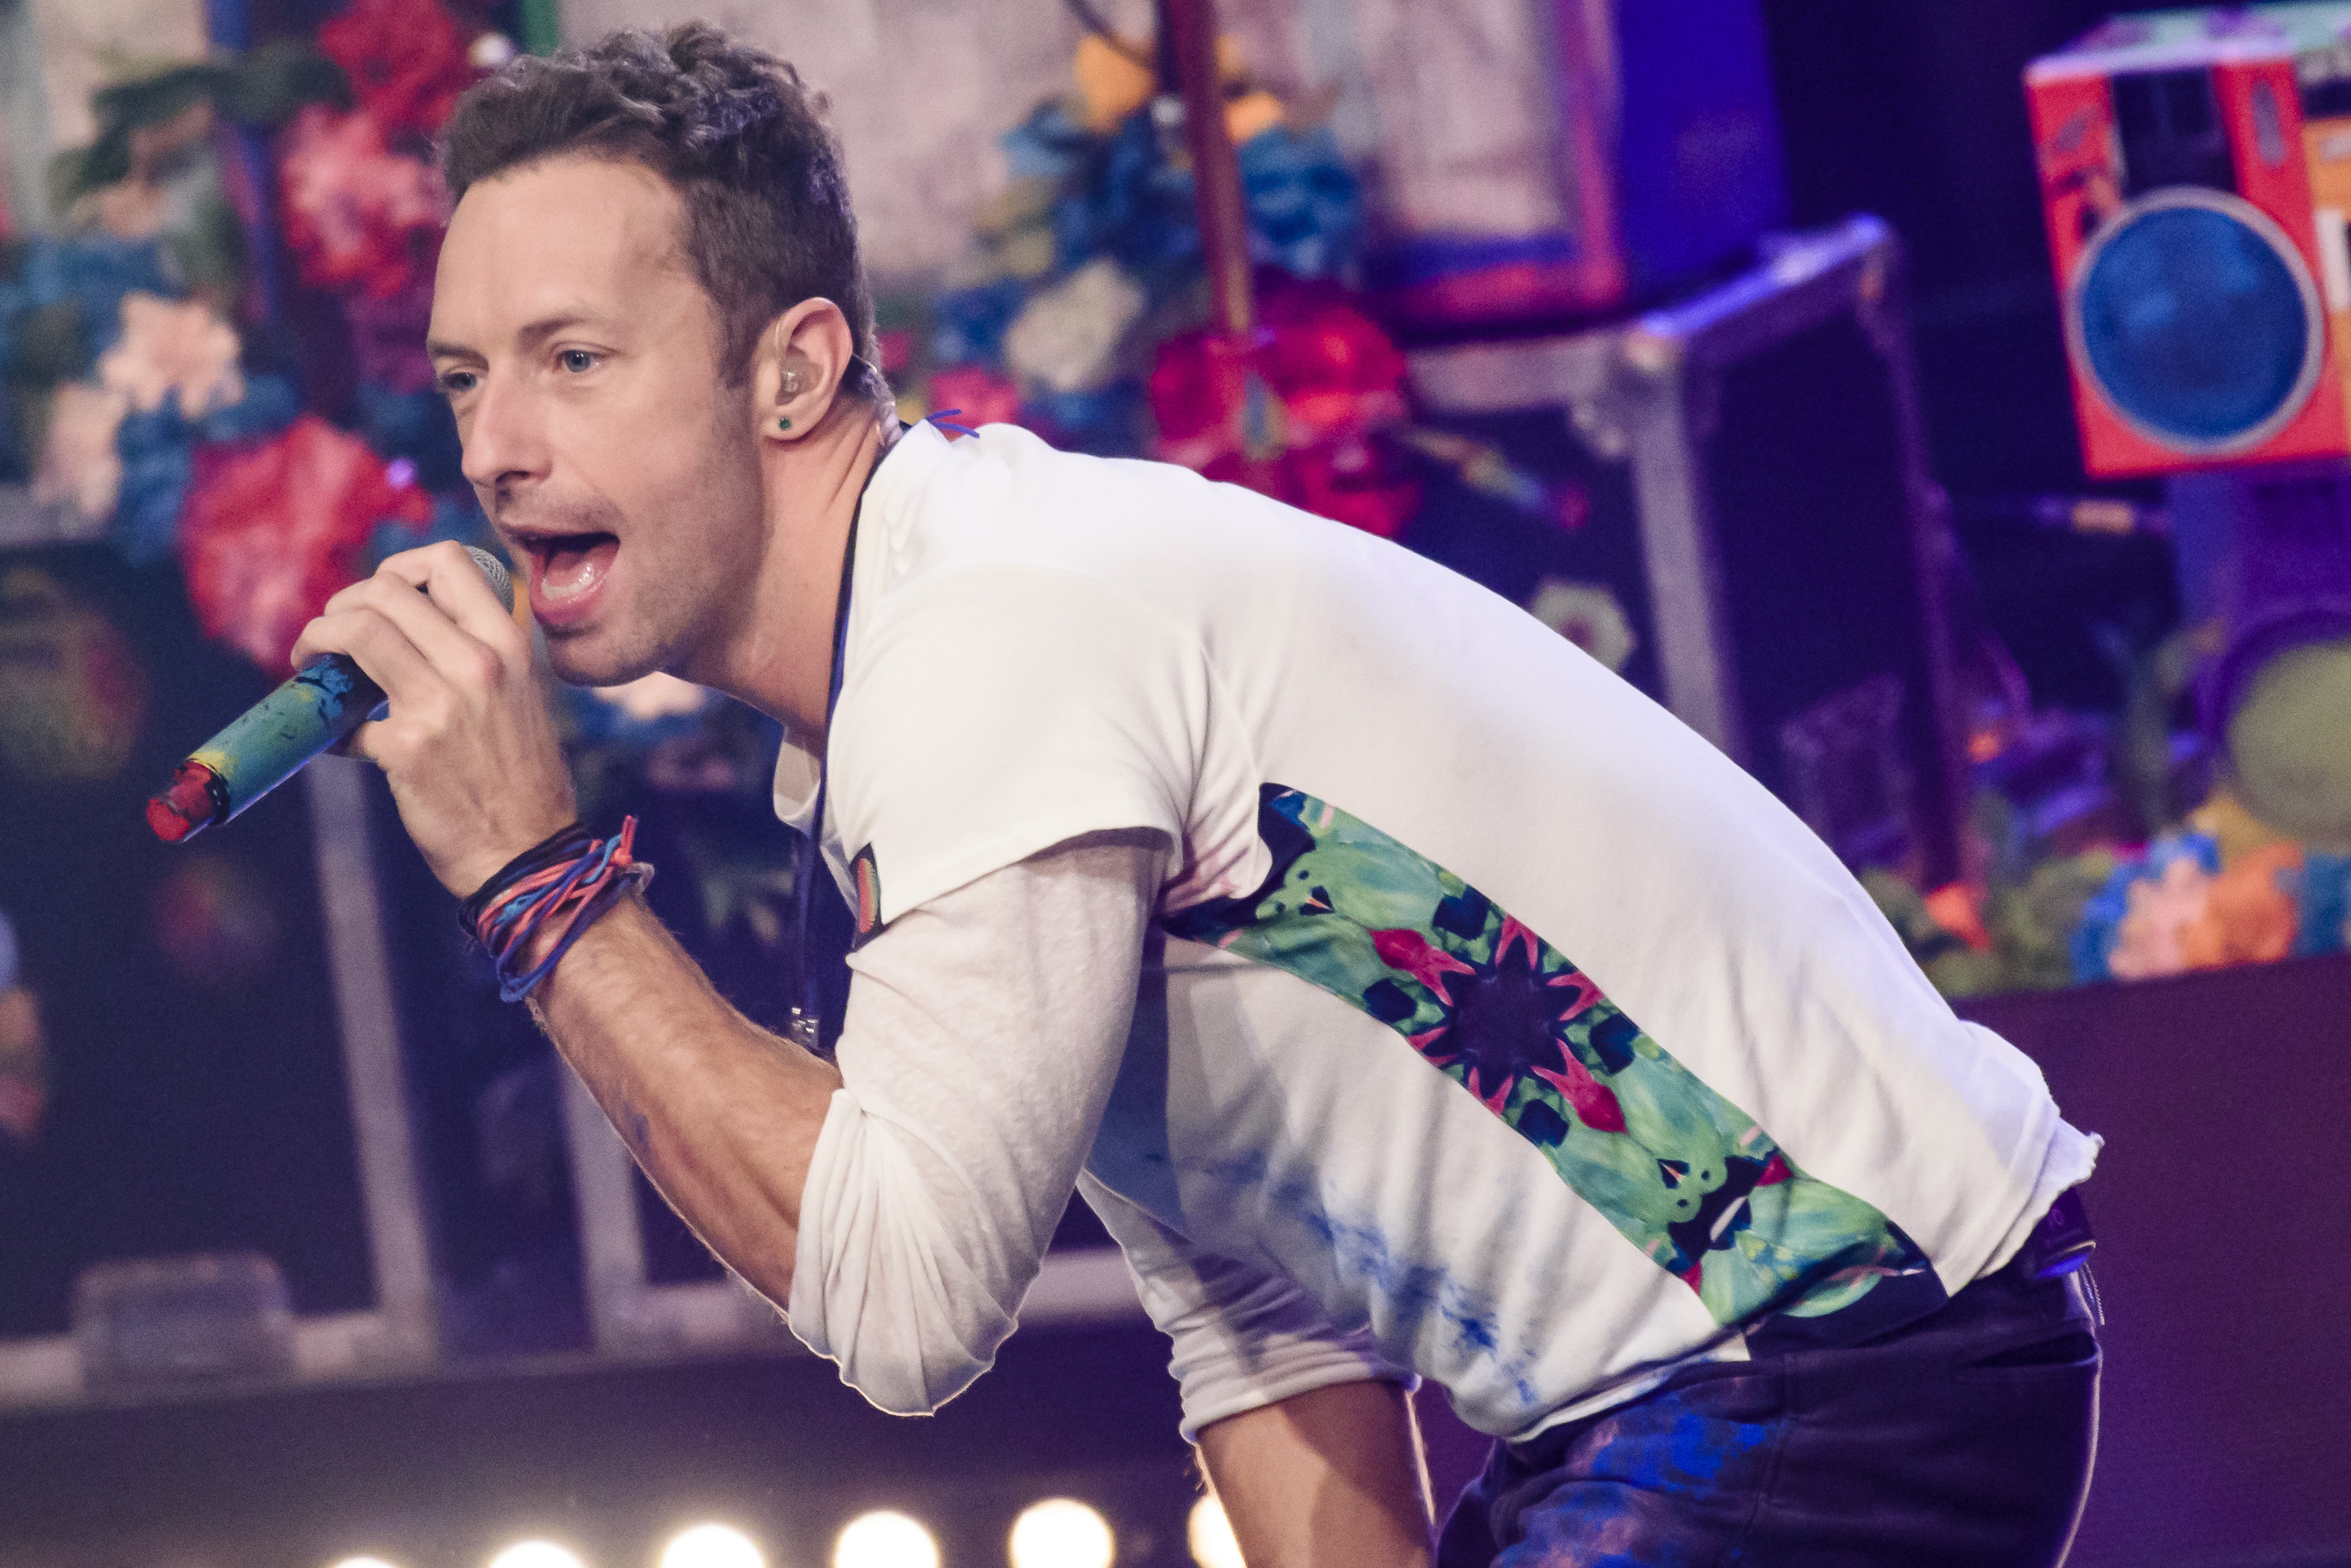 Chris Martin attends 'The Voice Of Germany - Finals' on December 17, 2015 in Berlin, Germany.